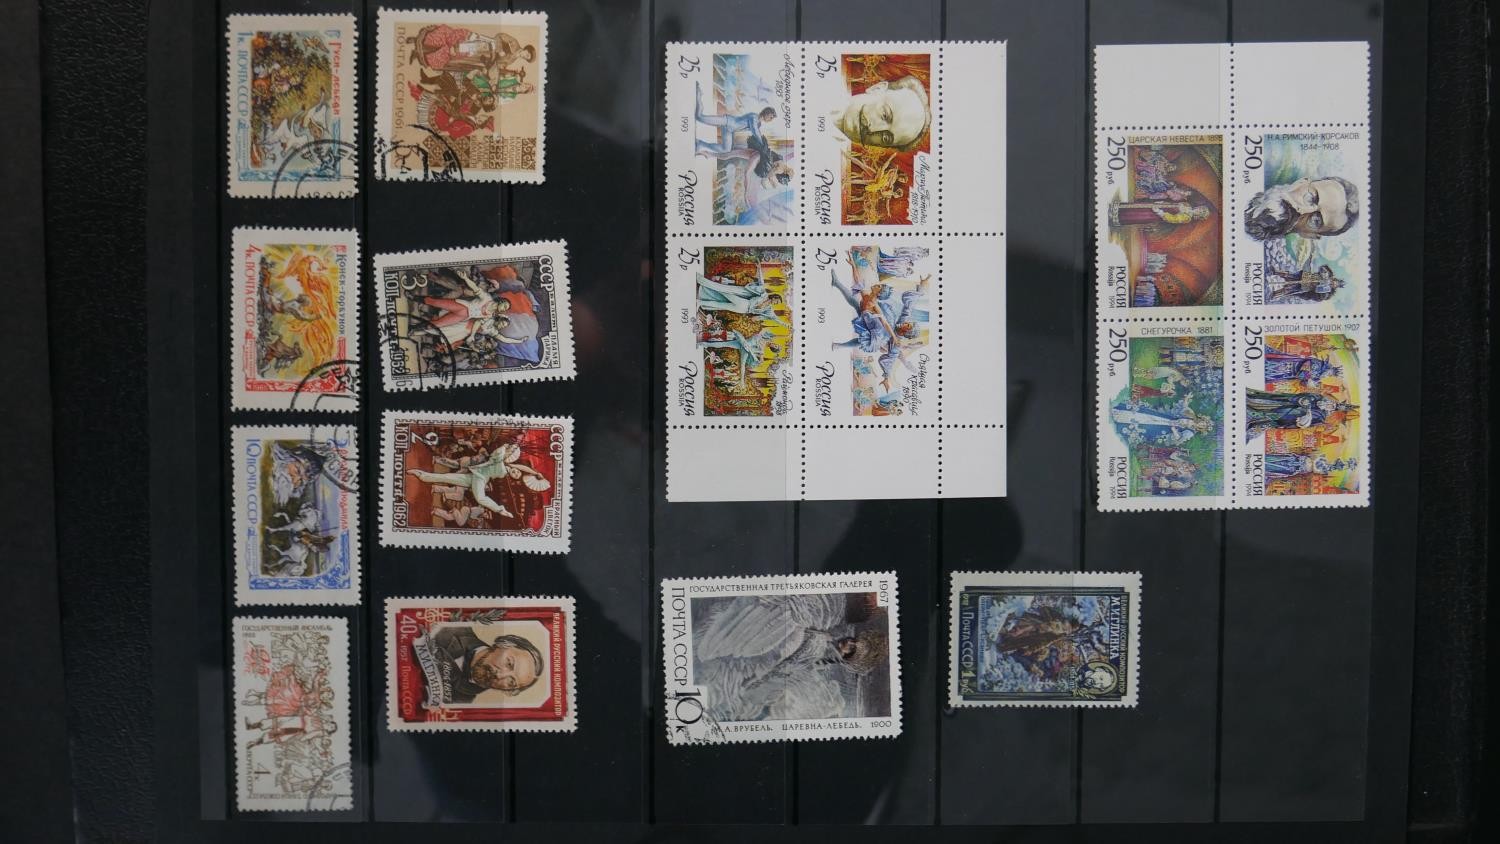 An album of world stamps along with a British Collecta coin album filled with various British coins. - Image 5 of 15